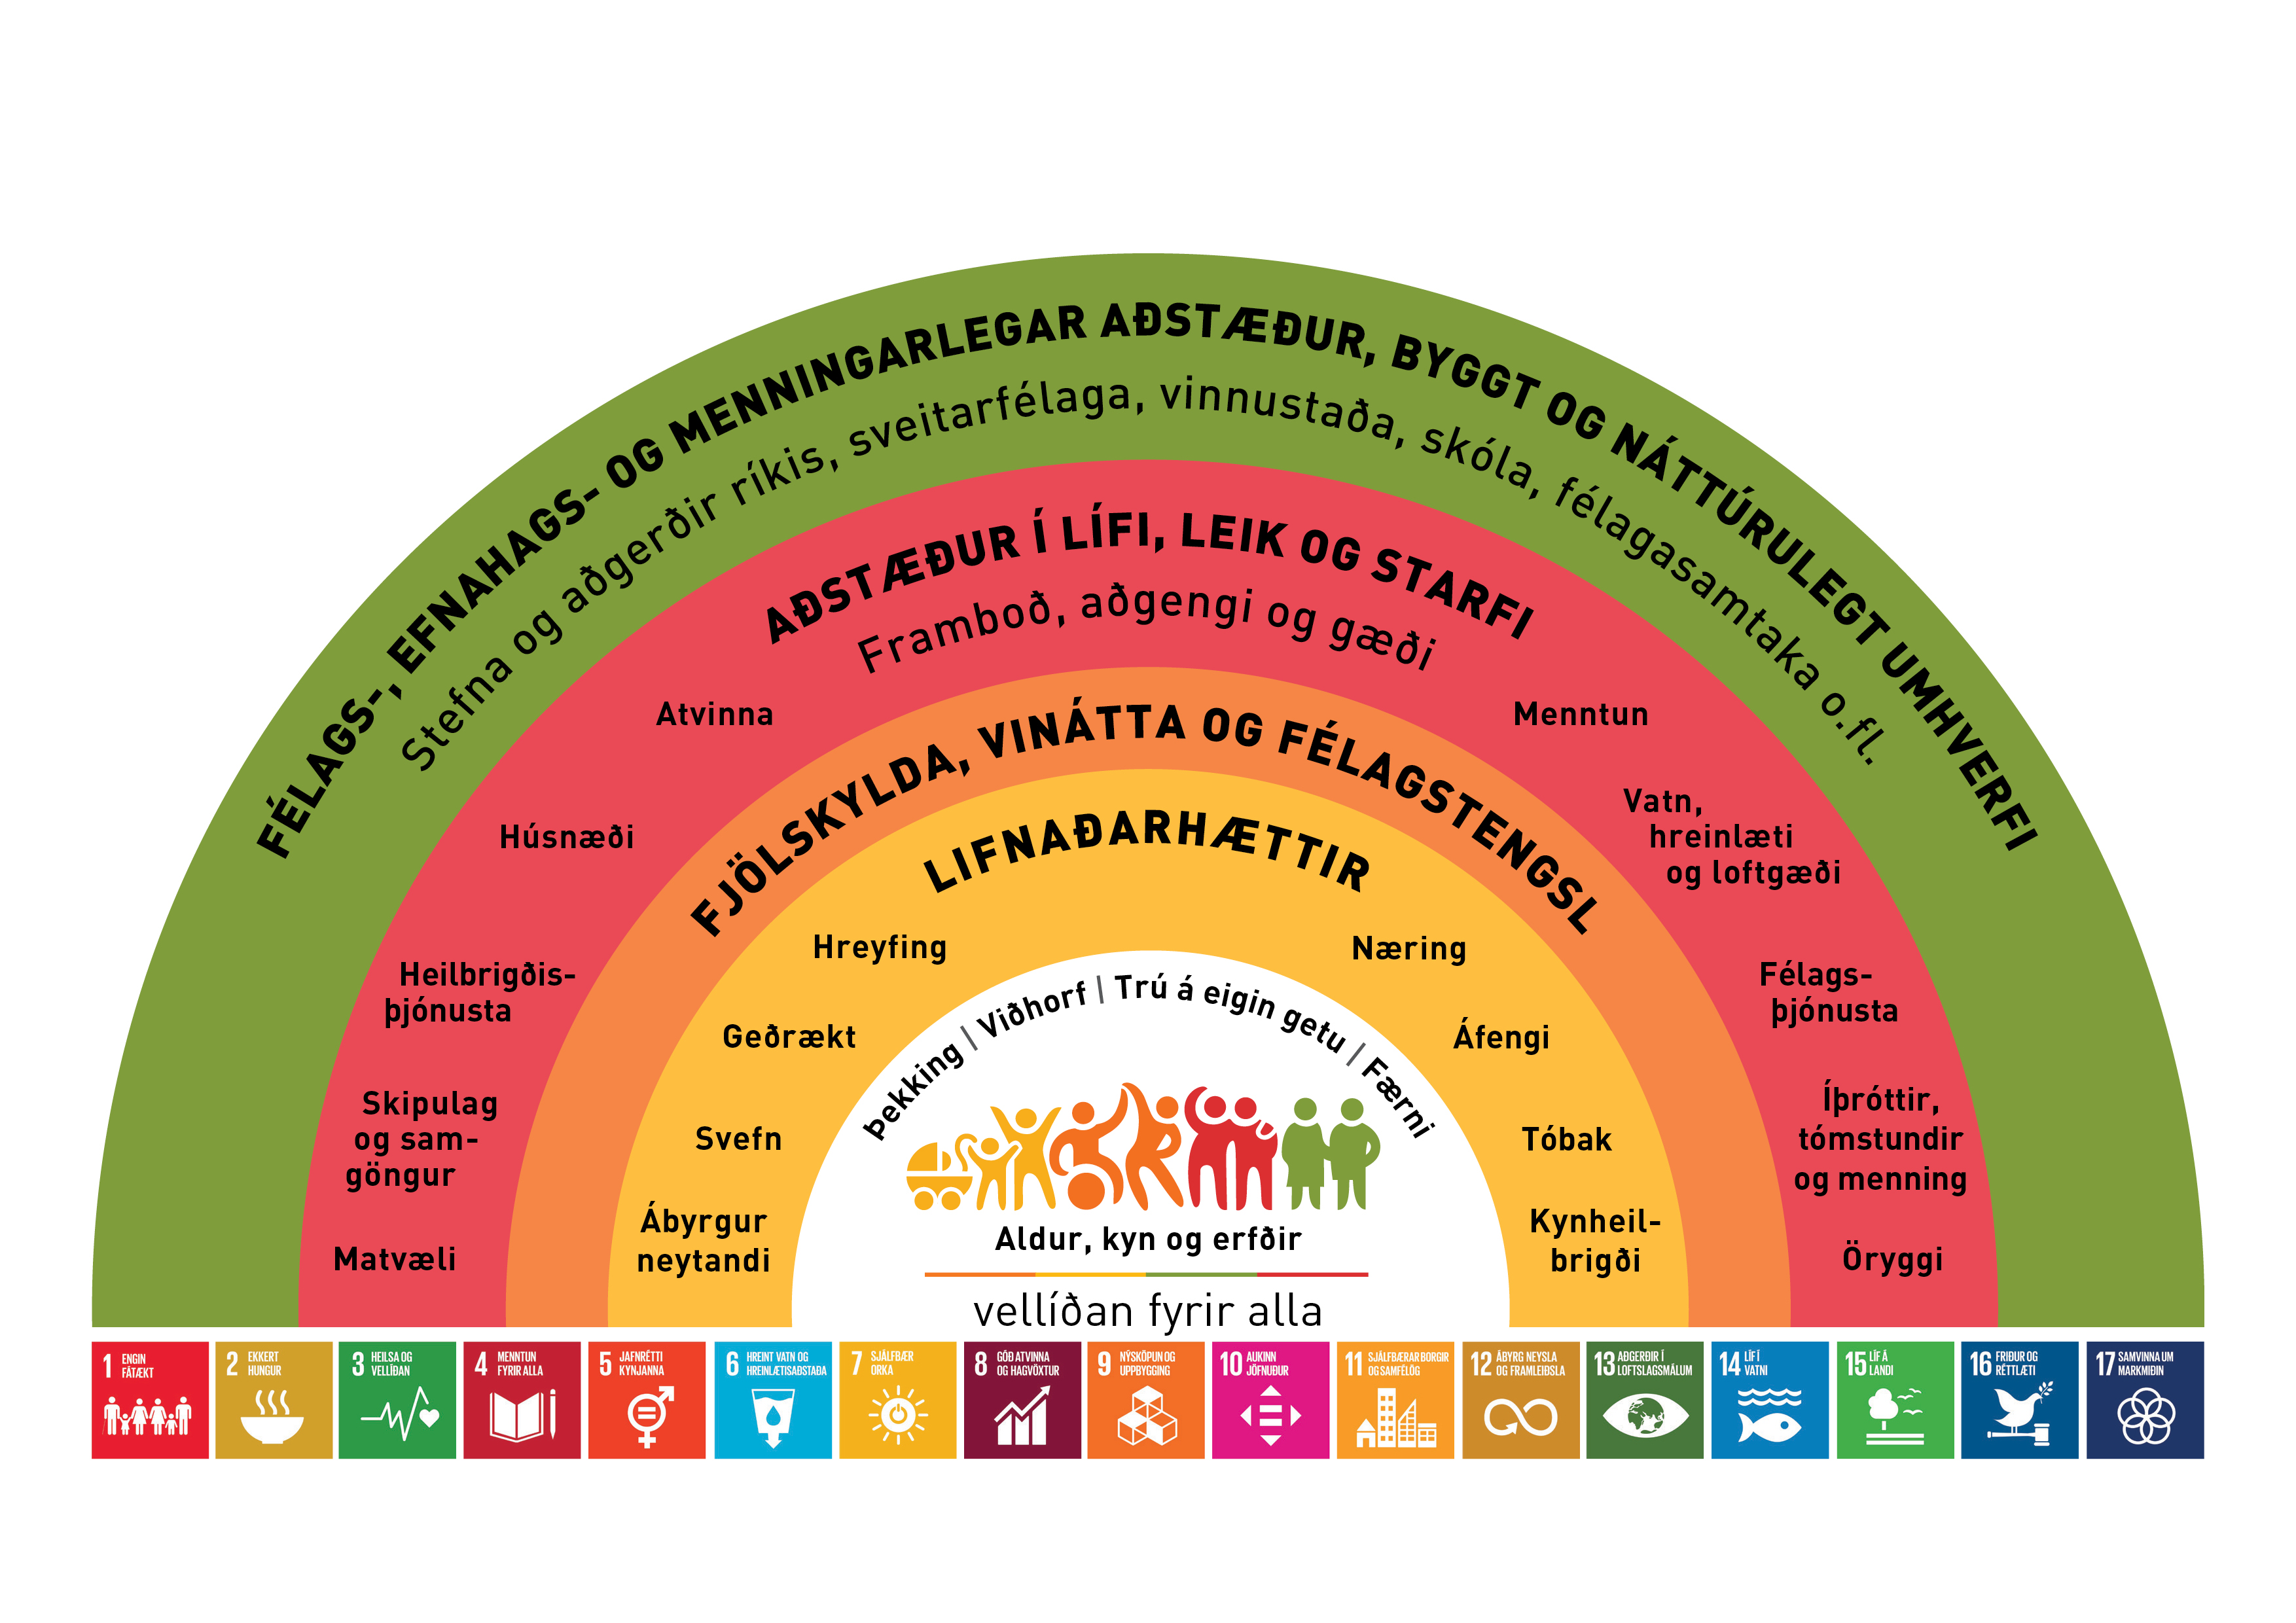 Determinants of health and the Global Goals - pricture